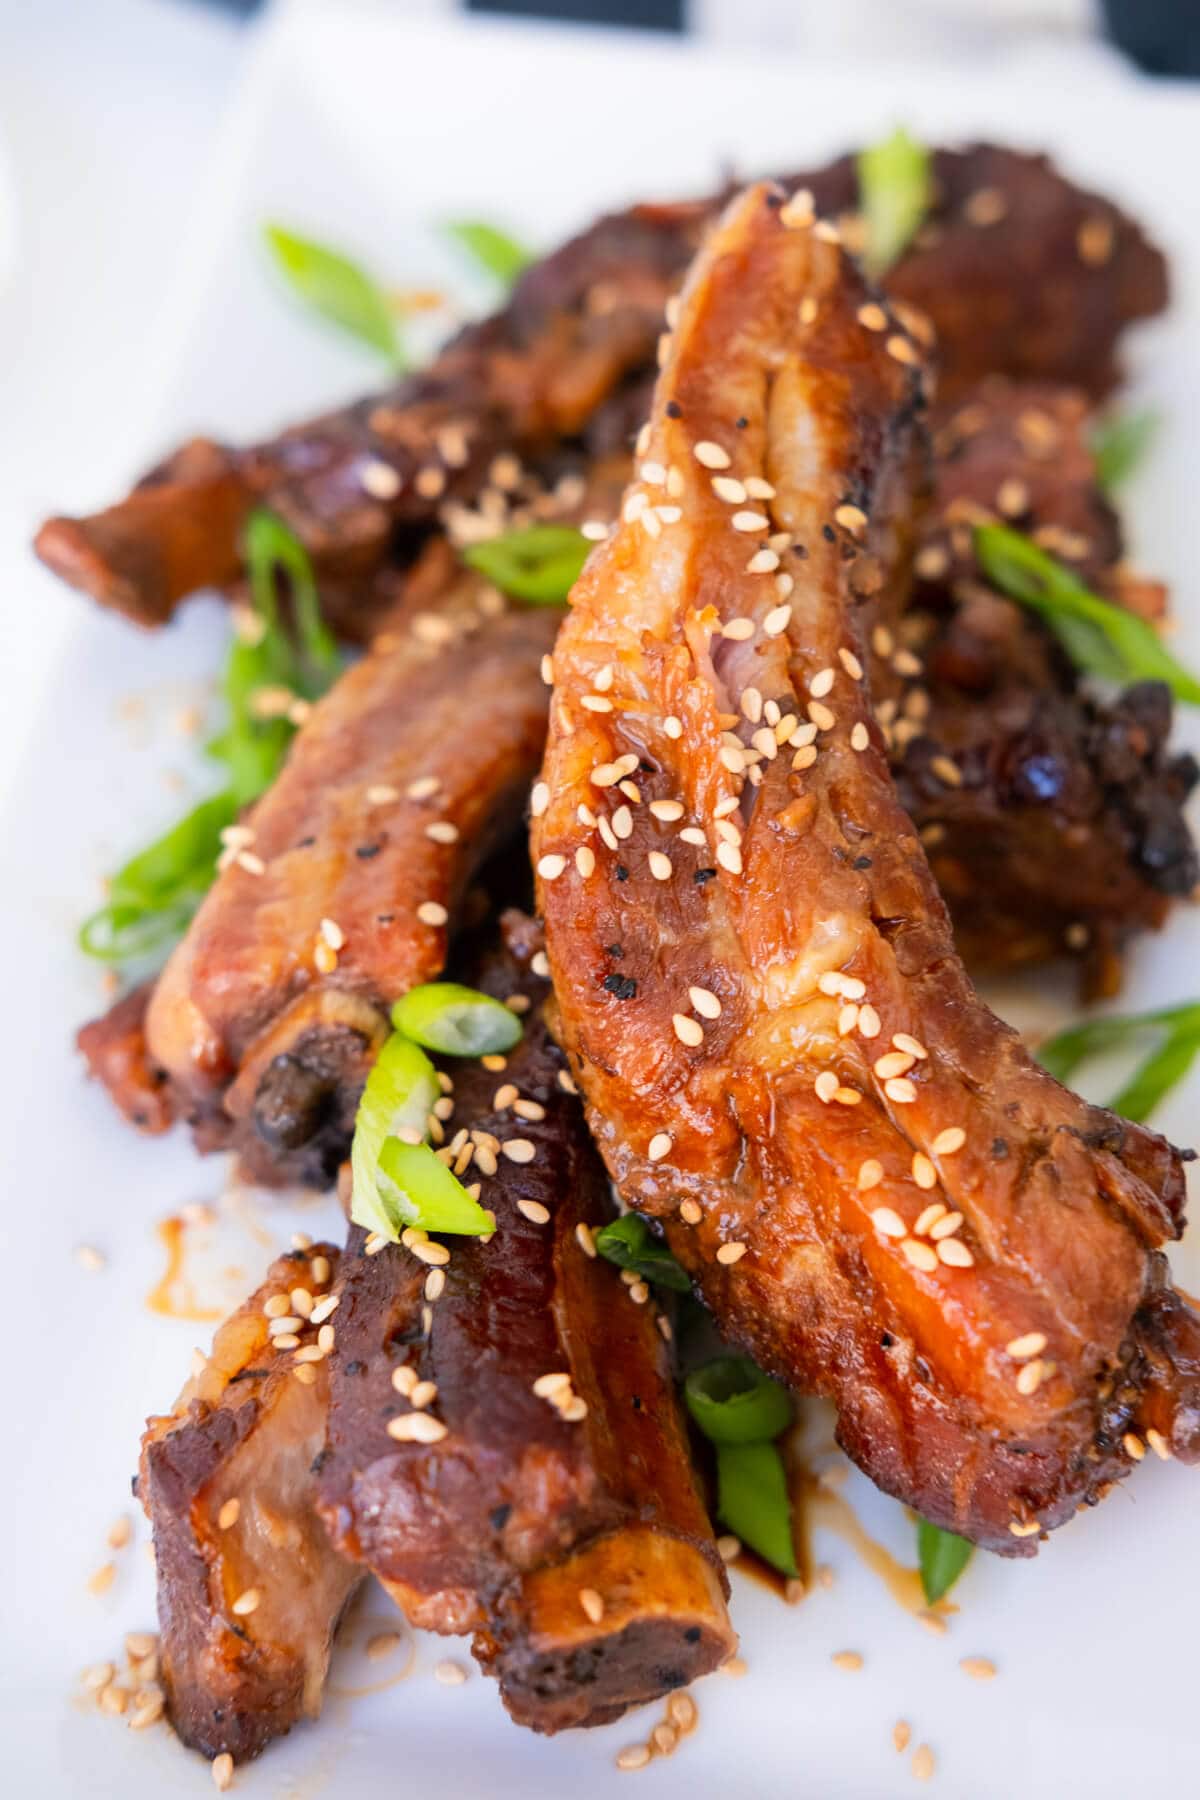 Tender and juicy ribs covered in teriyaki sauce served on a white plate. 